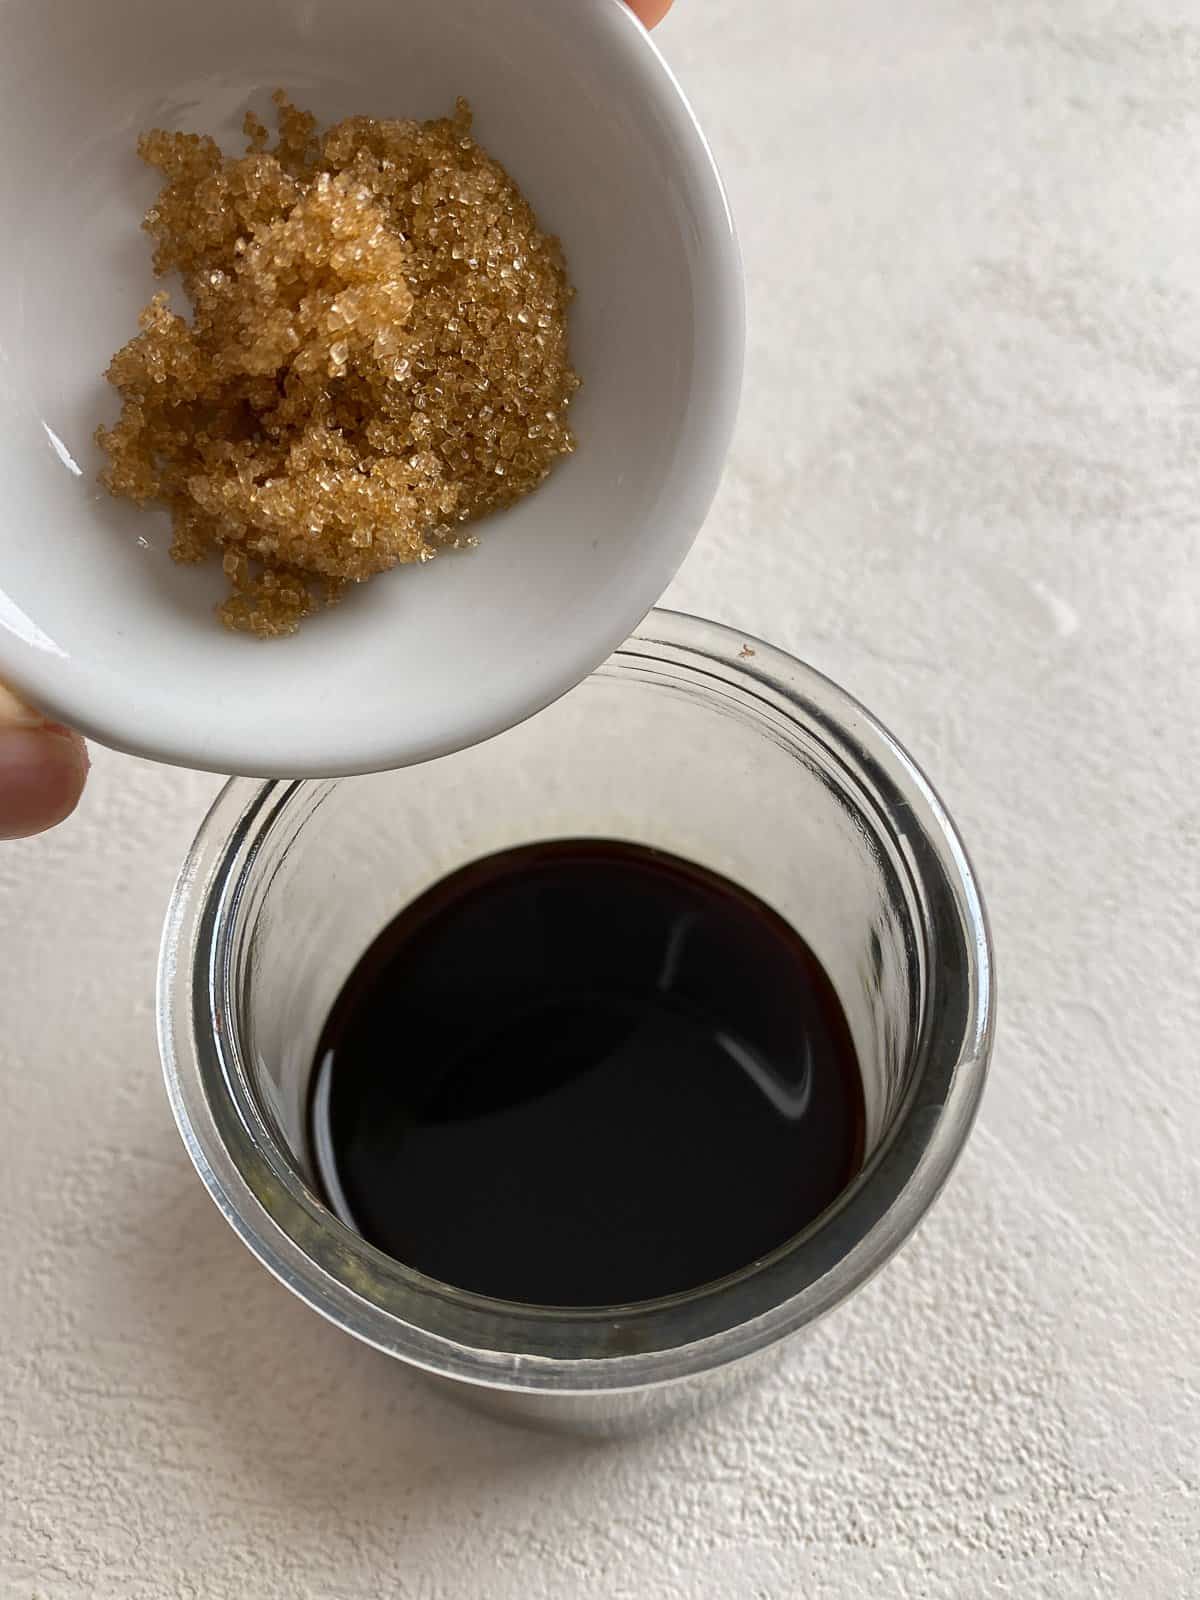 process of adding sugar to soy sauce in clear bowl